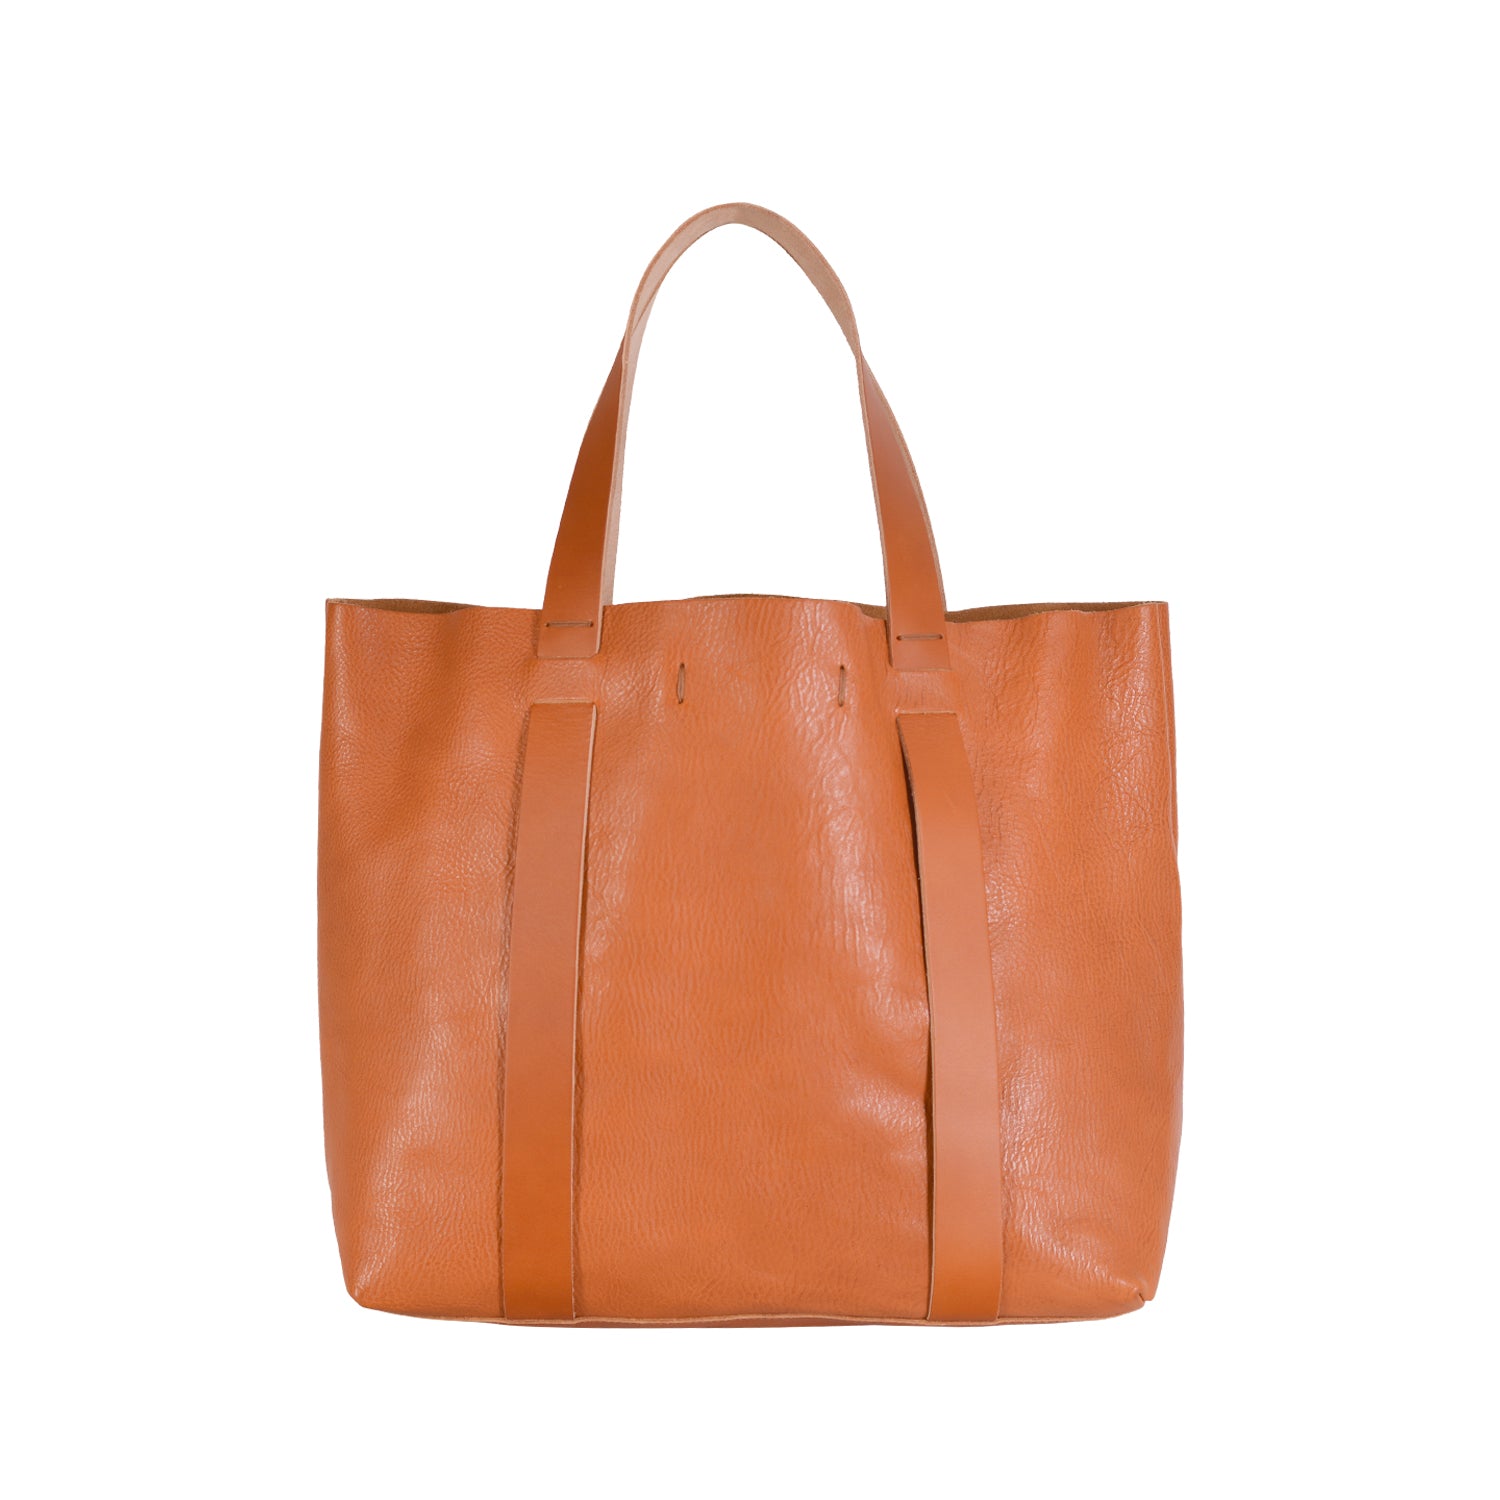 NEW IL BISONTE CARAMEL LEATHER TOTE